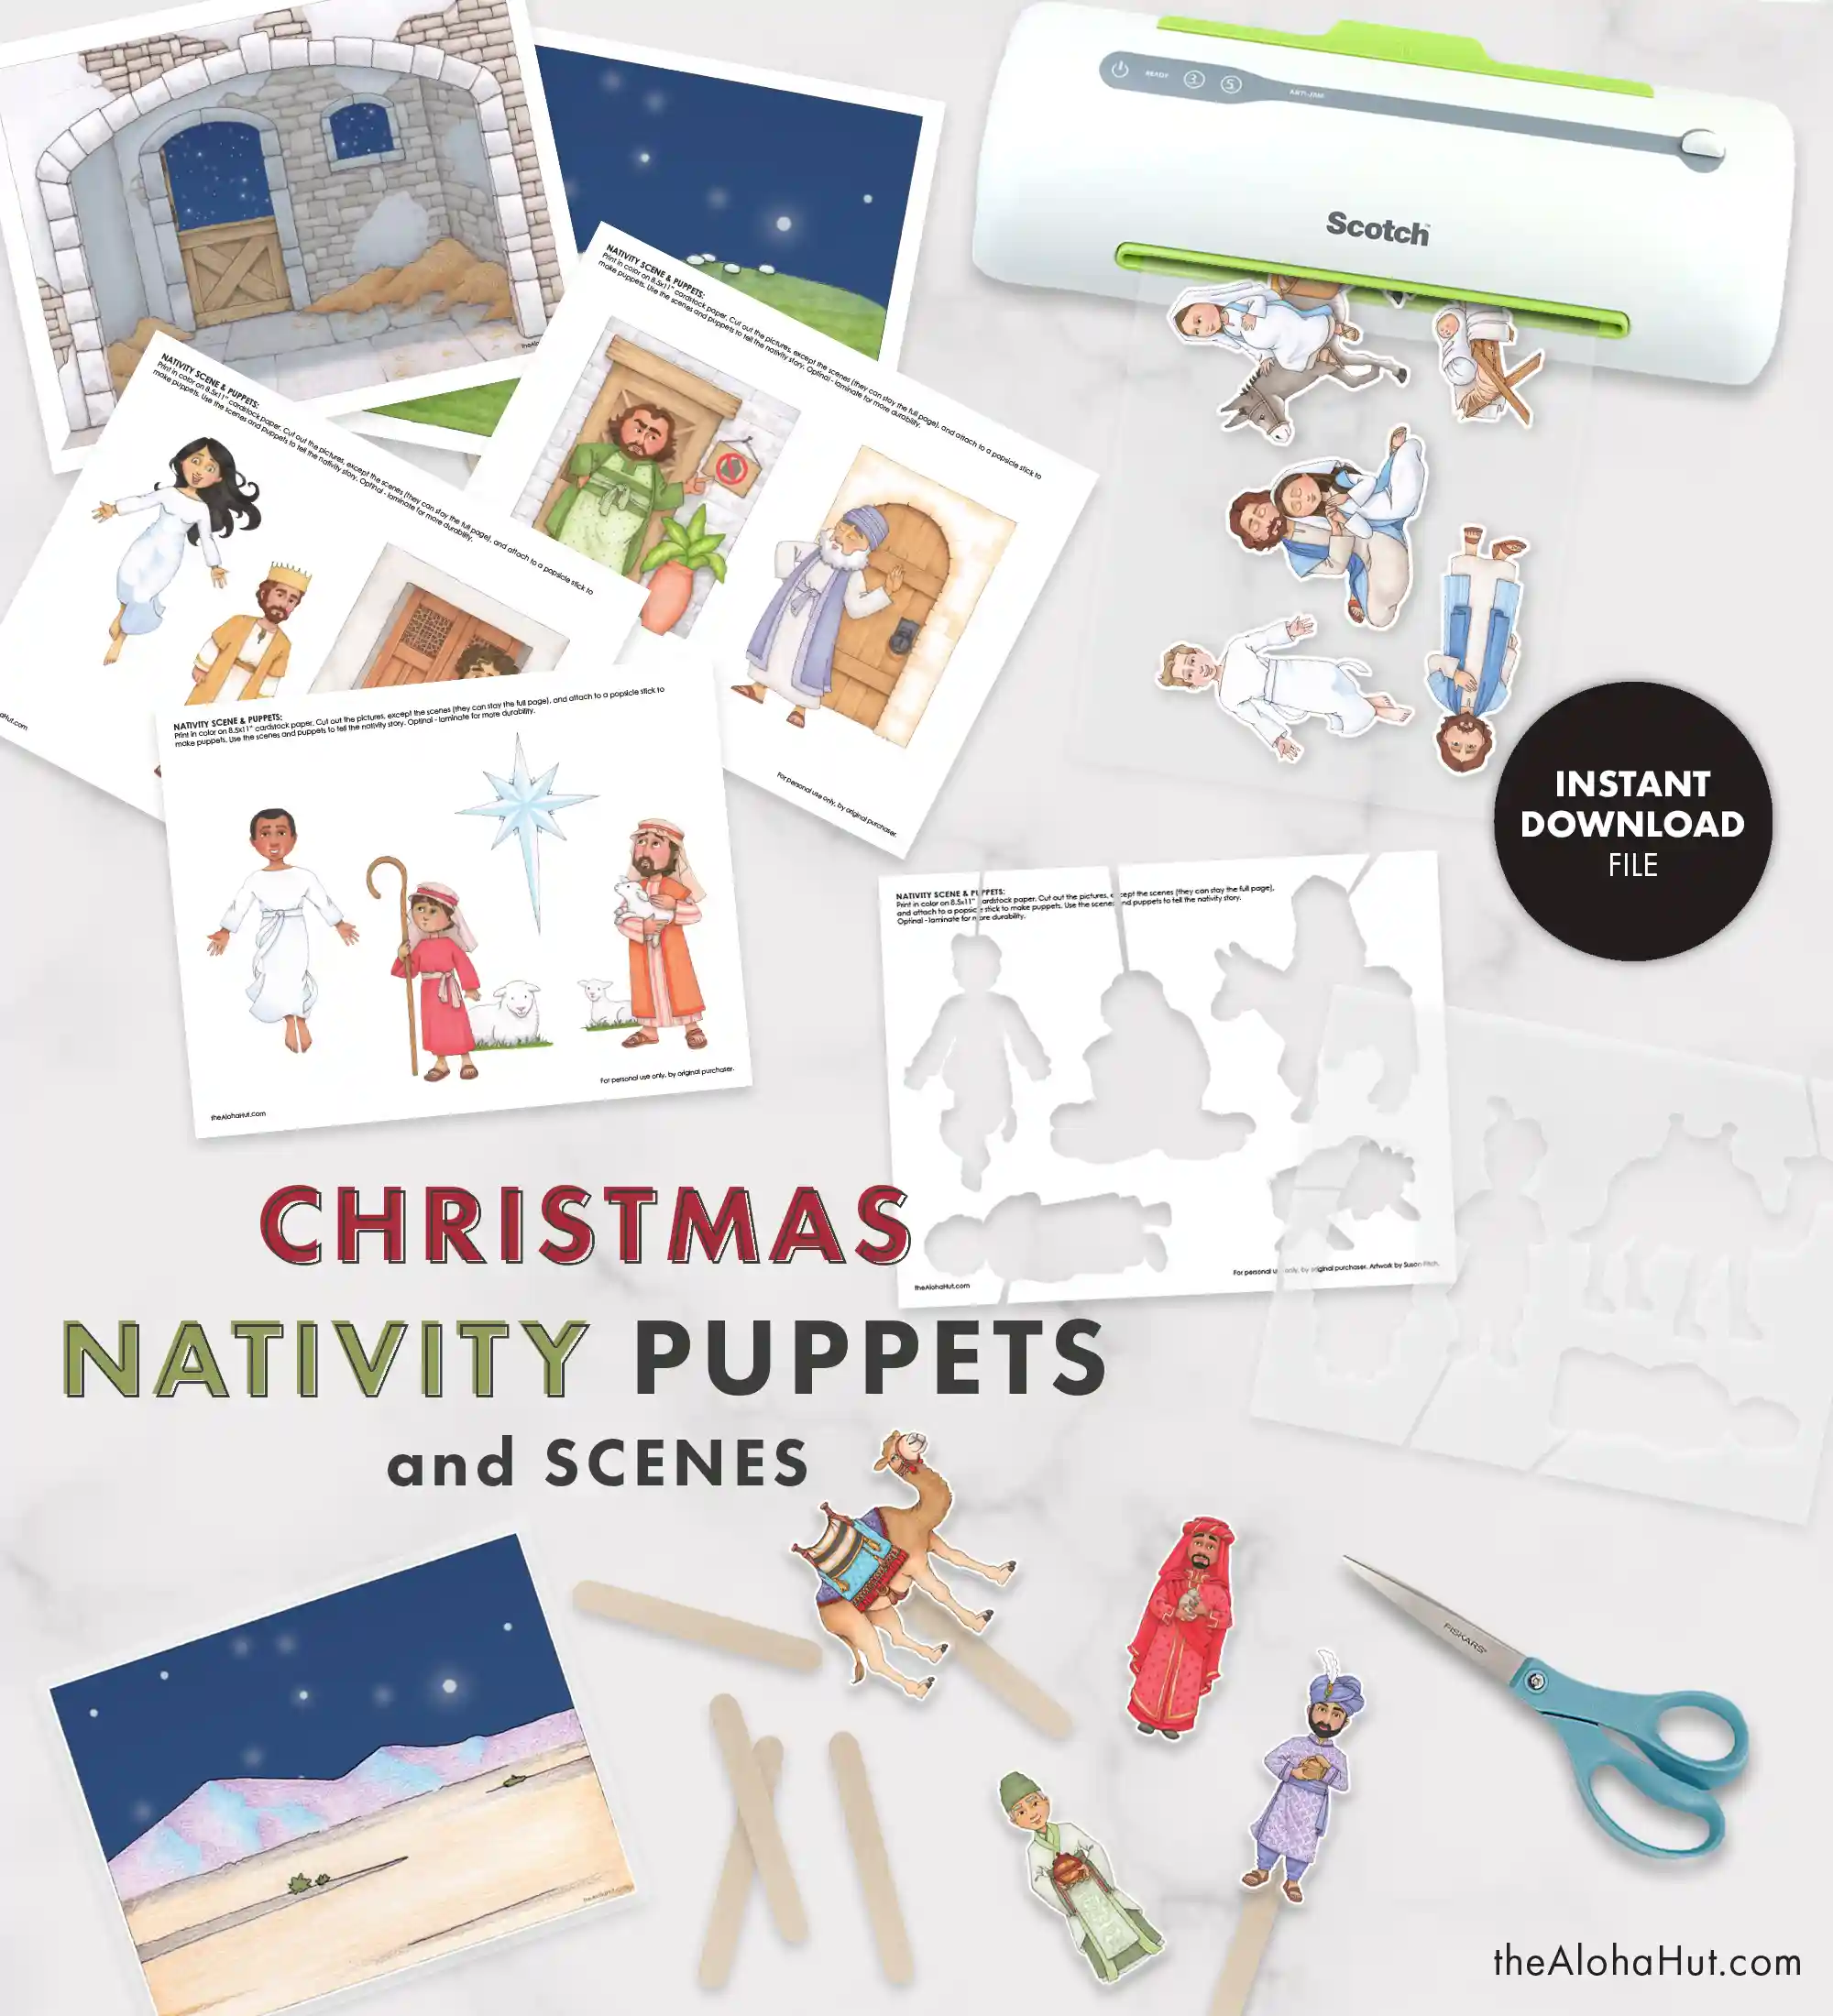 Christmas nativity puppets and scenes to help kids tell the Christmas story of the birth of Jesus Christ. Download the printable nativity puppets and scenes to add to your Christmas traditions in teaching about Christ's birth.